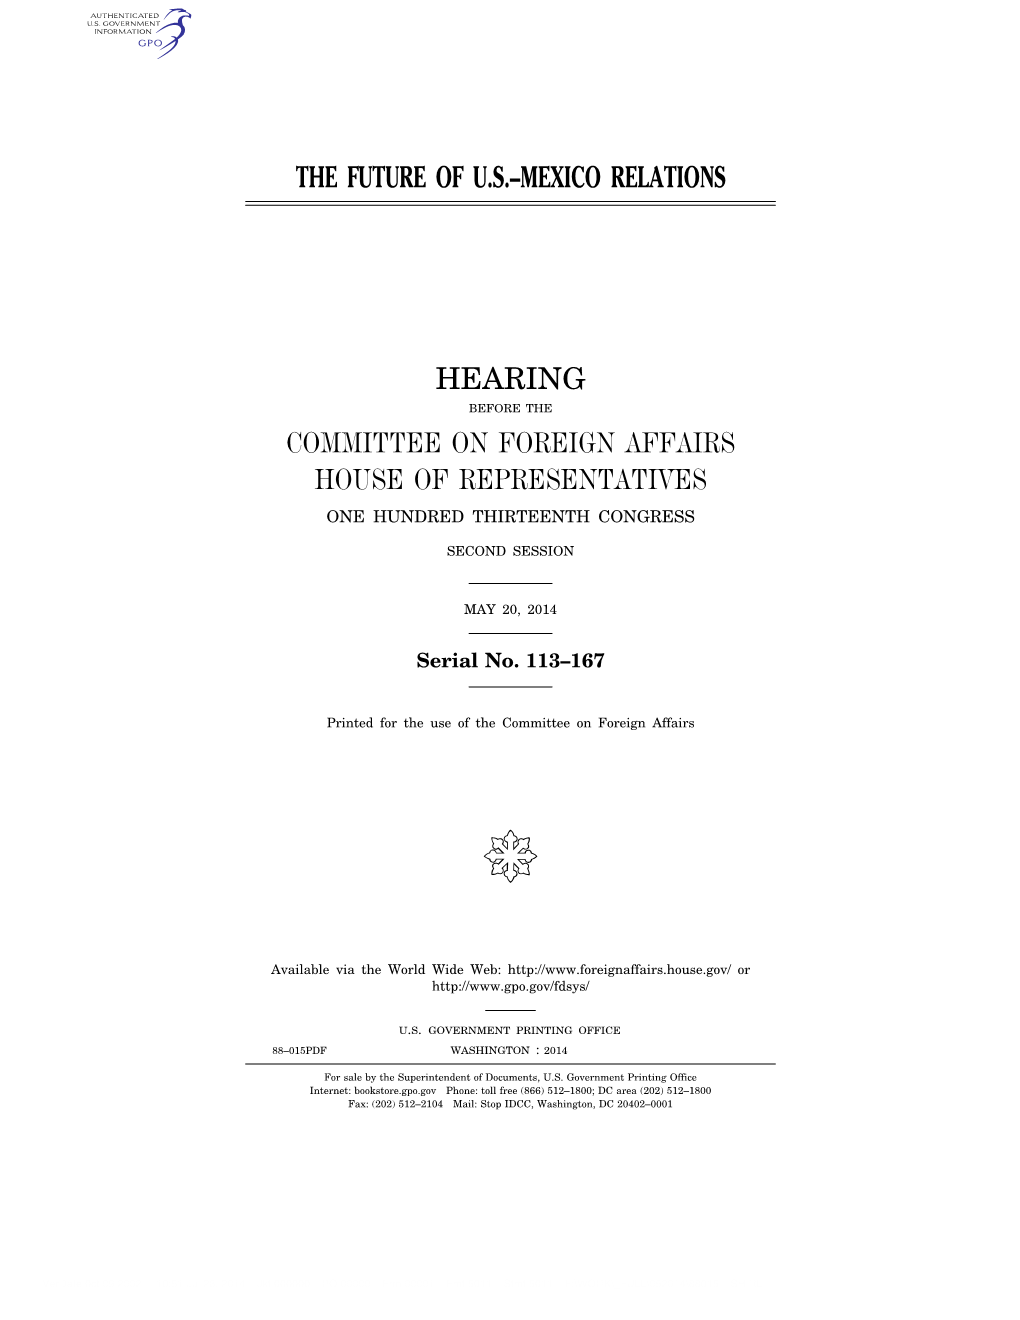 The Future of U.S.–Mexico Relations Hearing